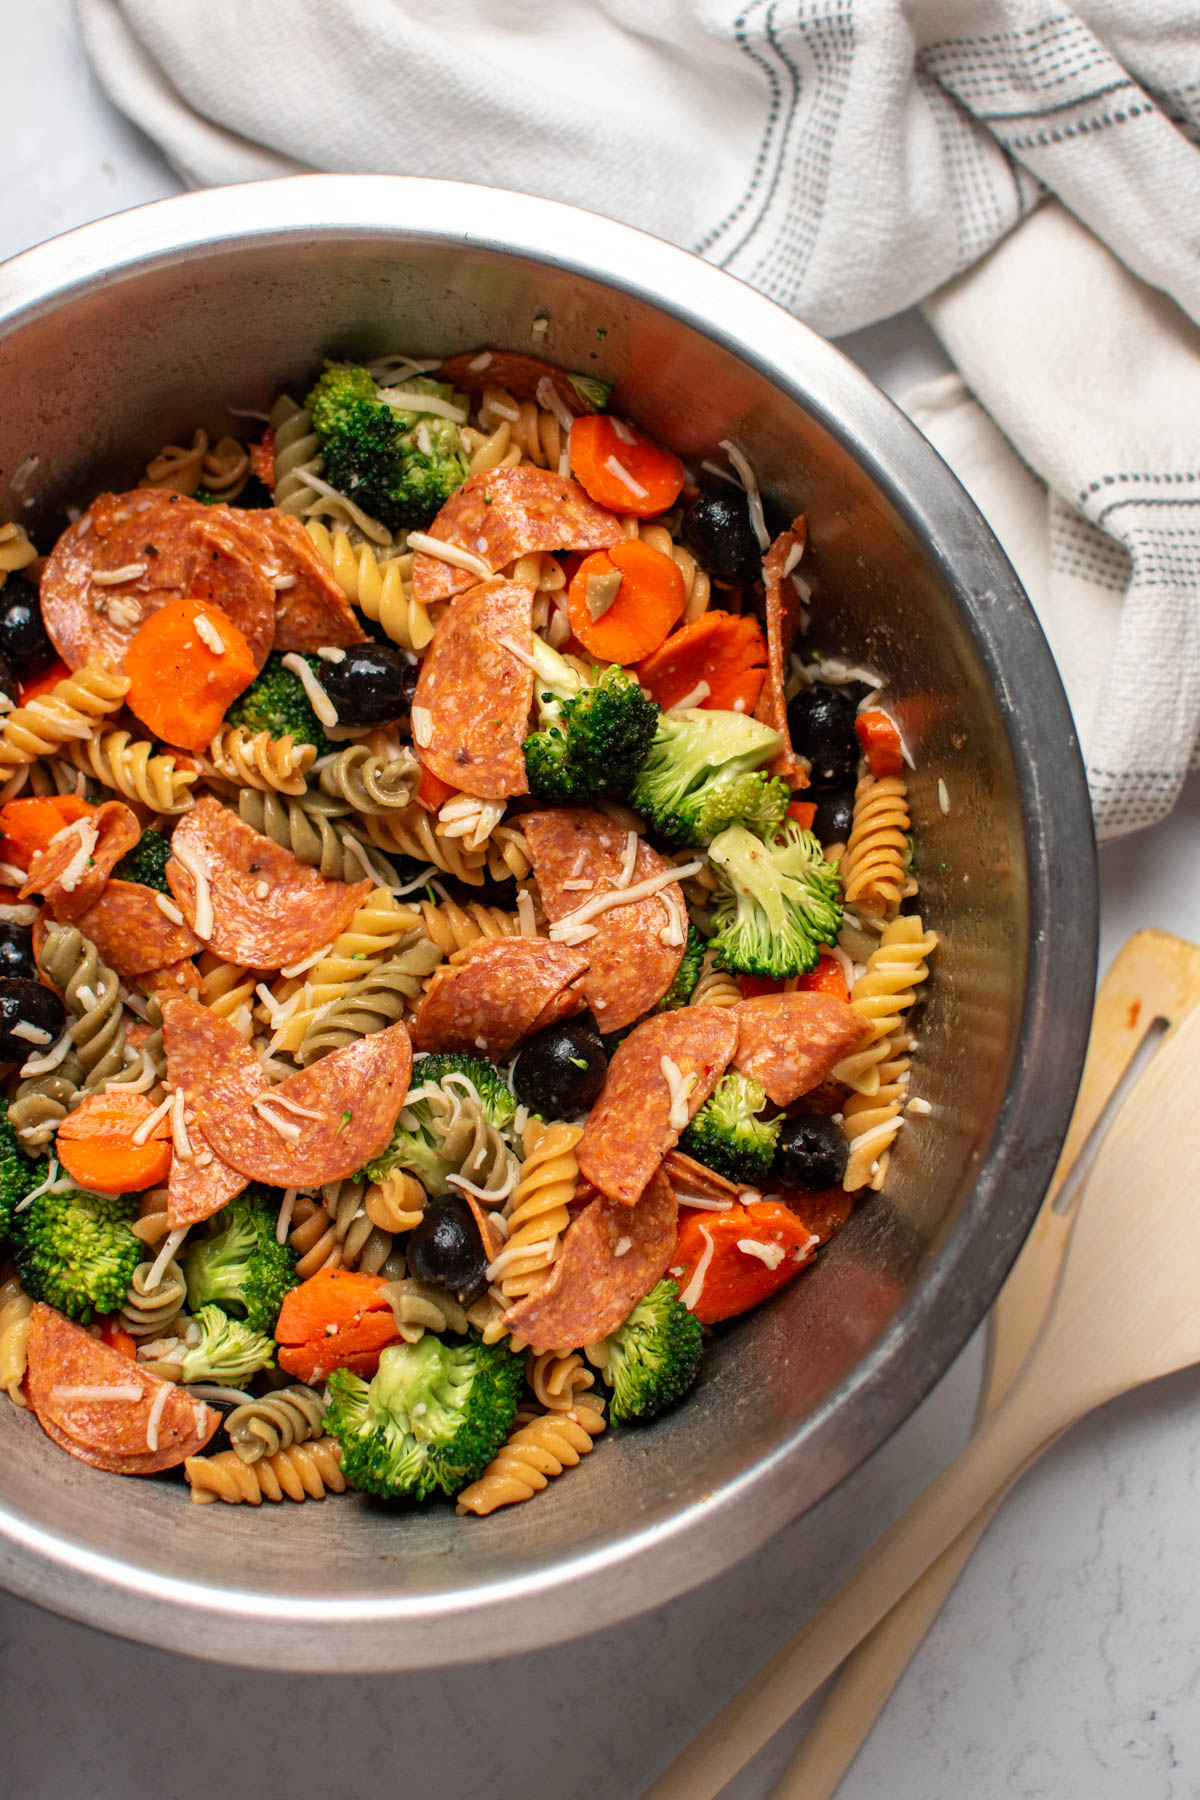 Tri color pasta salad with pepperoni and vegetables in large metal mixing bowl.